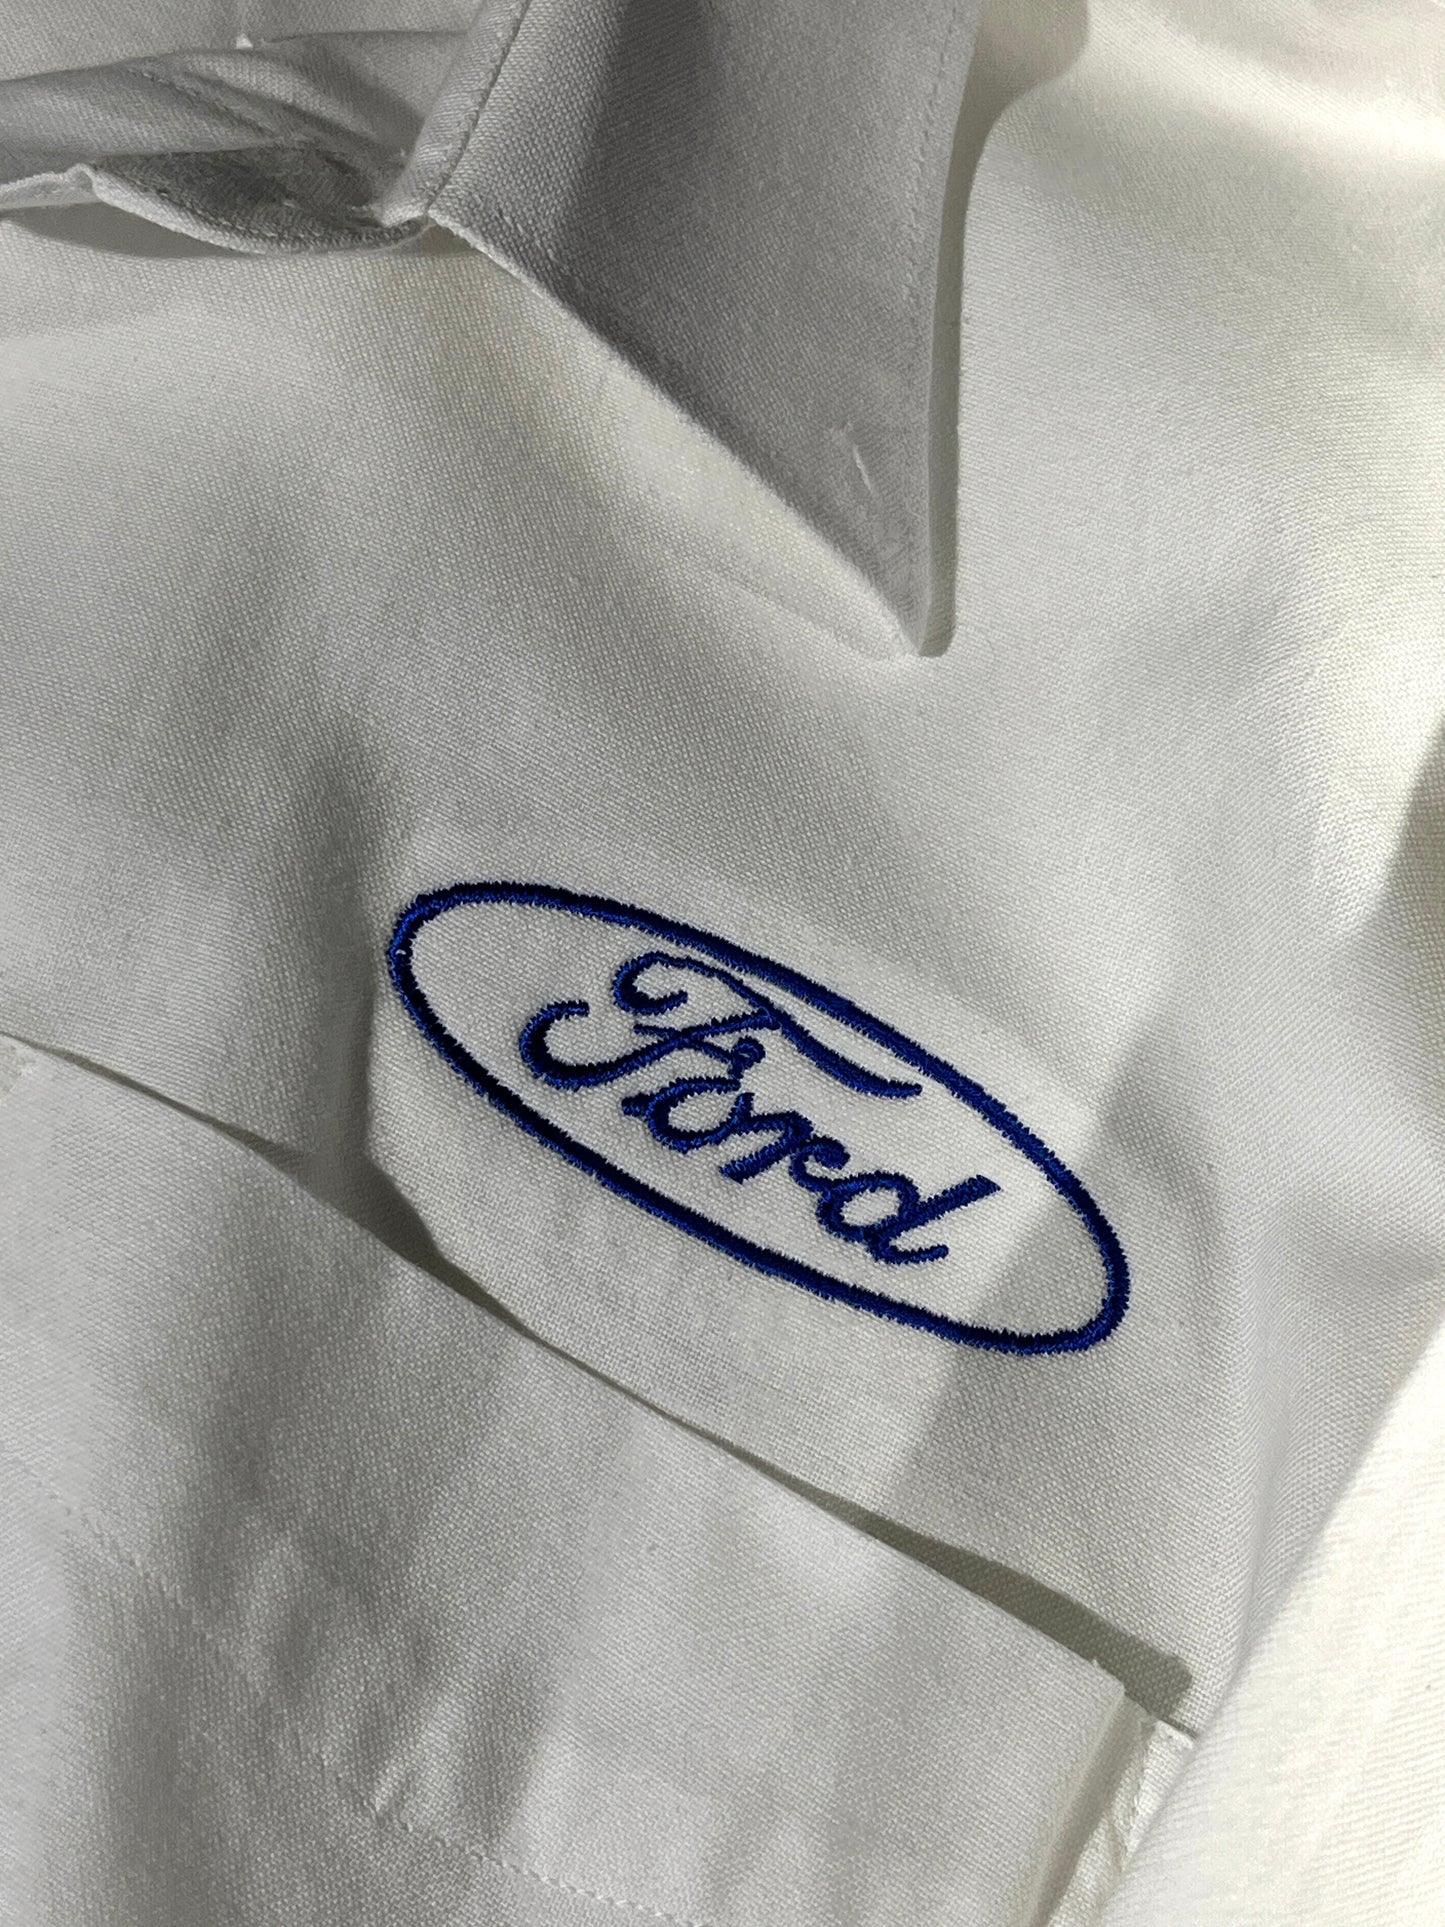 Vintage Ford Shirt Long Sleeve Button Up Car Embroidered Badge